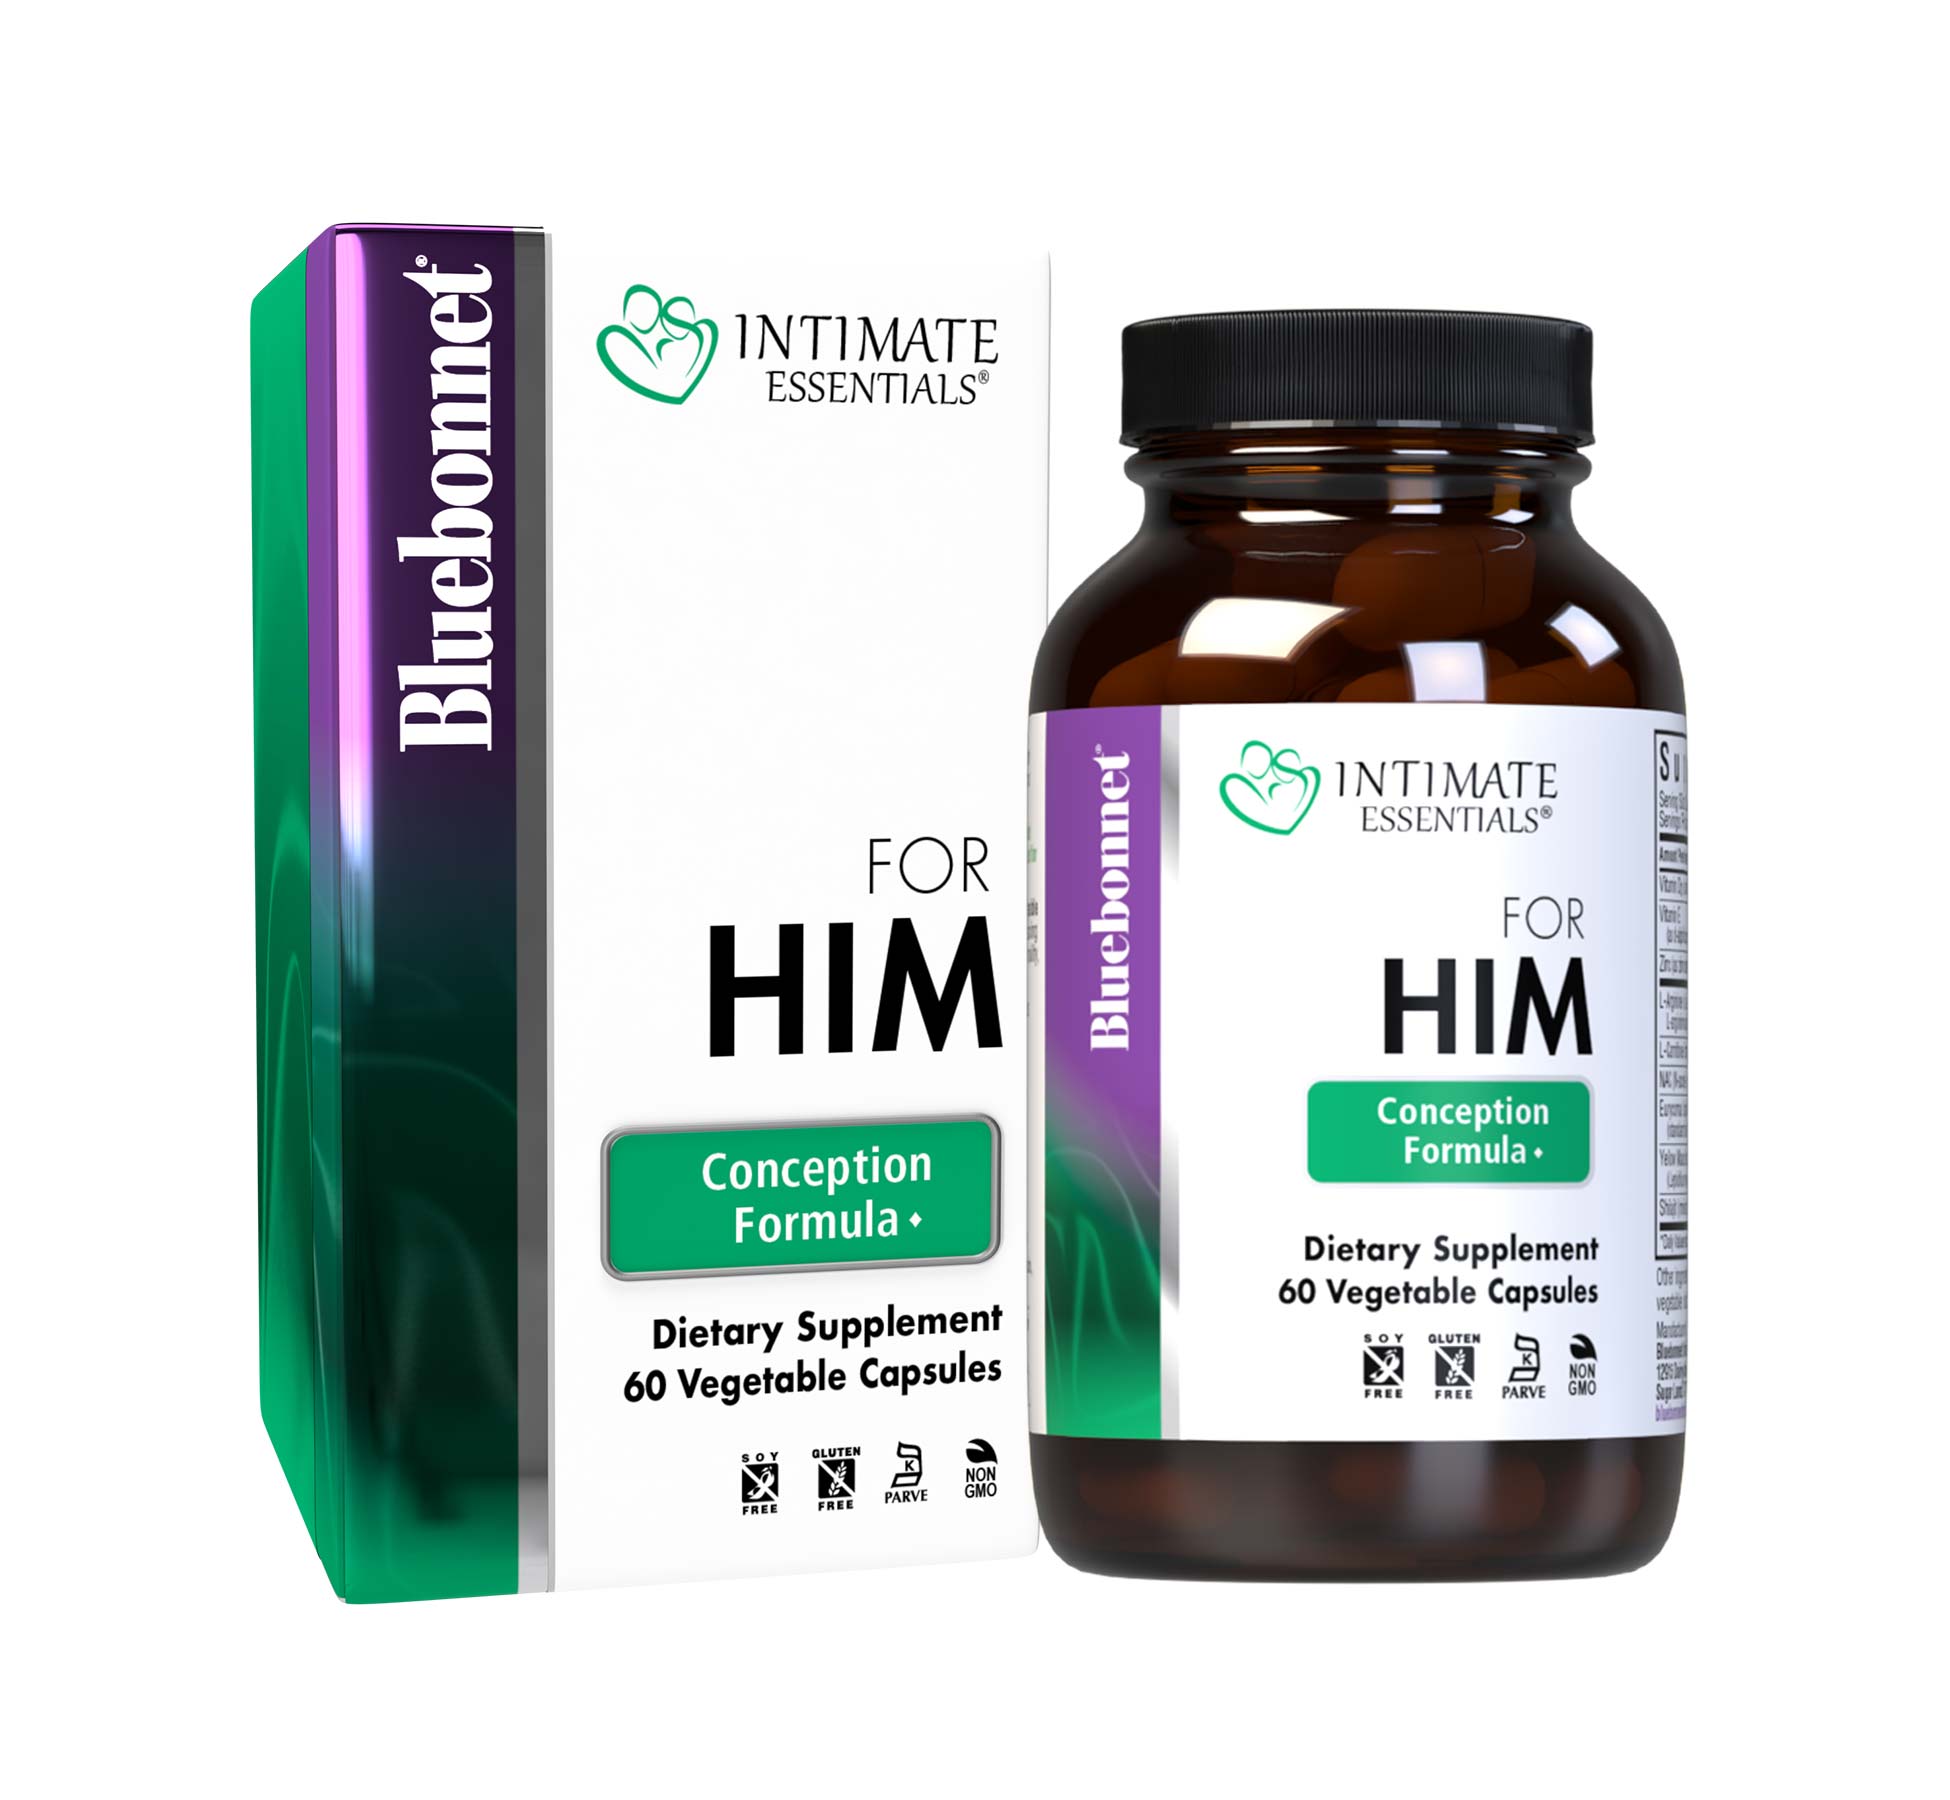 INTIMATE ESSENTIALS CONCEPTION FORMULA FOR HIM 60 vegetable capsules May Support Testosterone levels & Healthy Sperm. bottle with box. #size_60 count